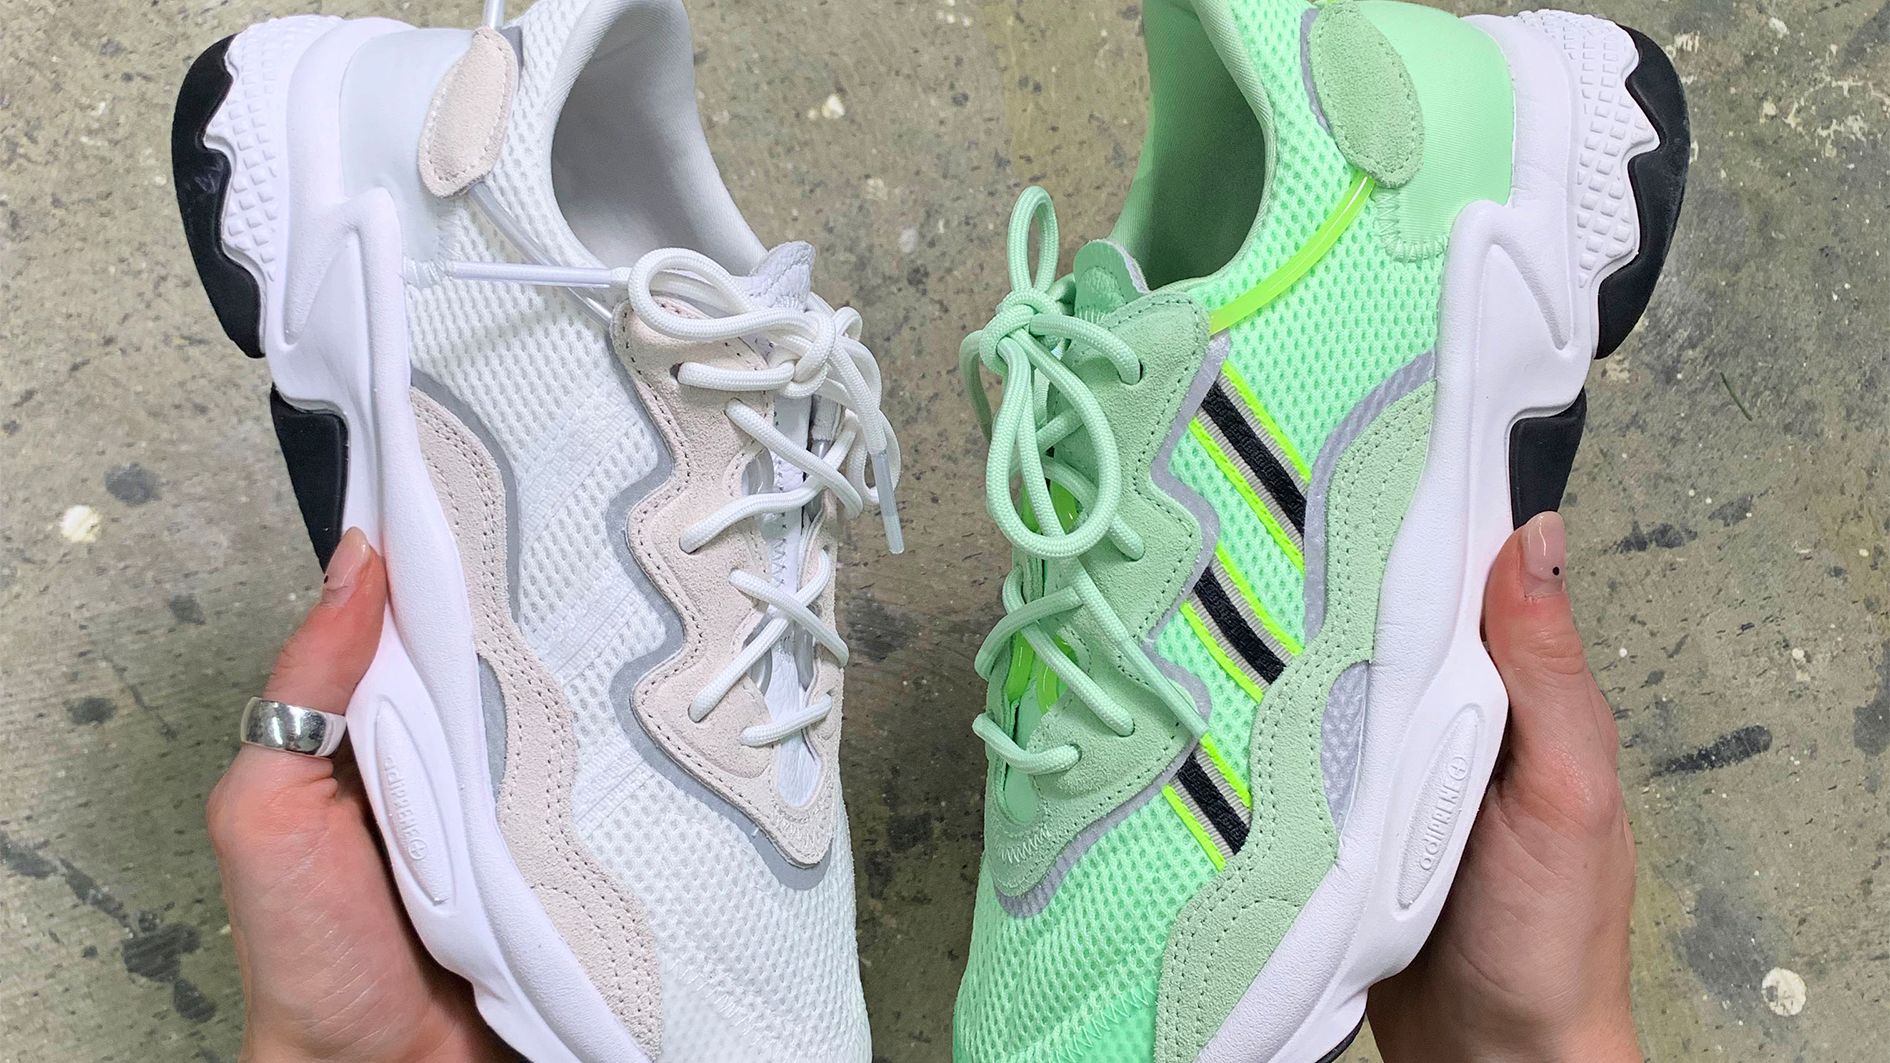 adidas Ozweego Sizing: How Do They Fit? | The Sole Supplier